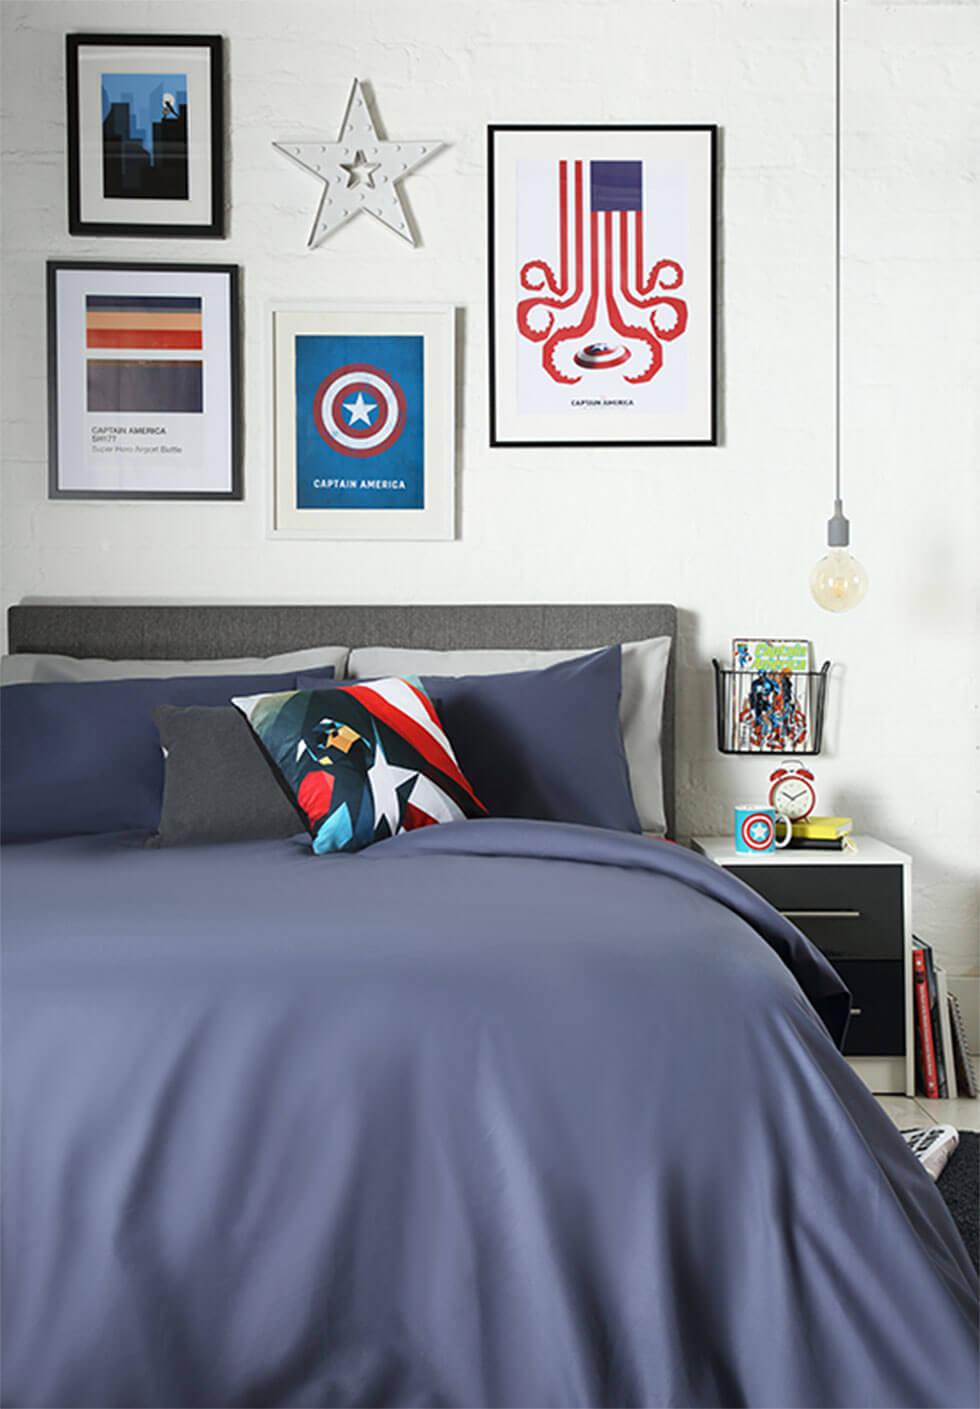 A superhero-themed bedroom feature wall with framed comic book covers and move posters.